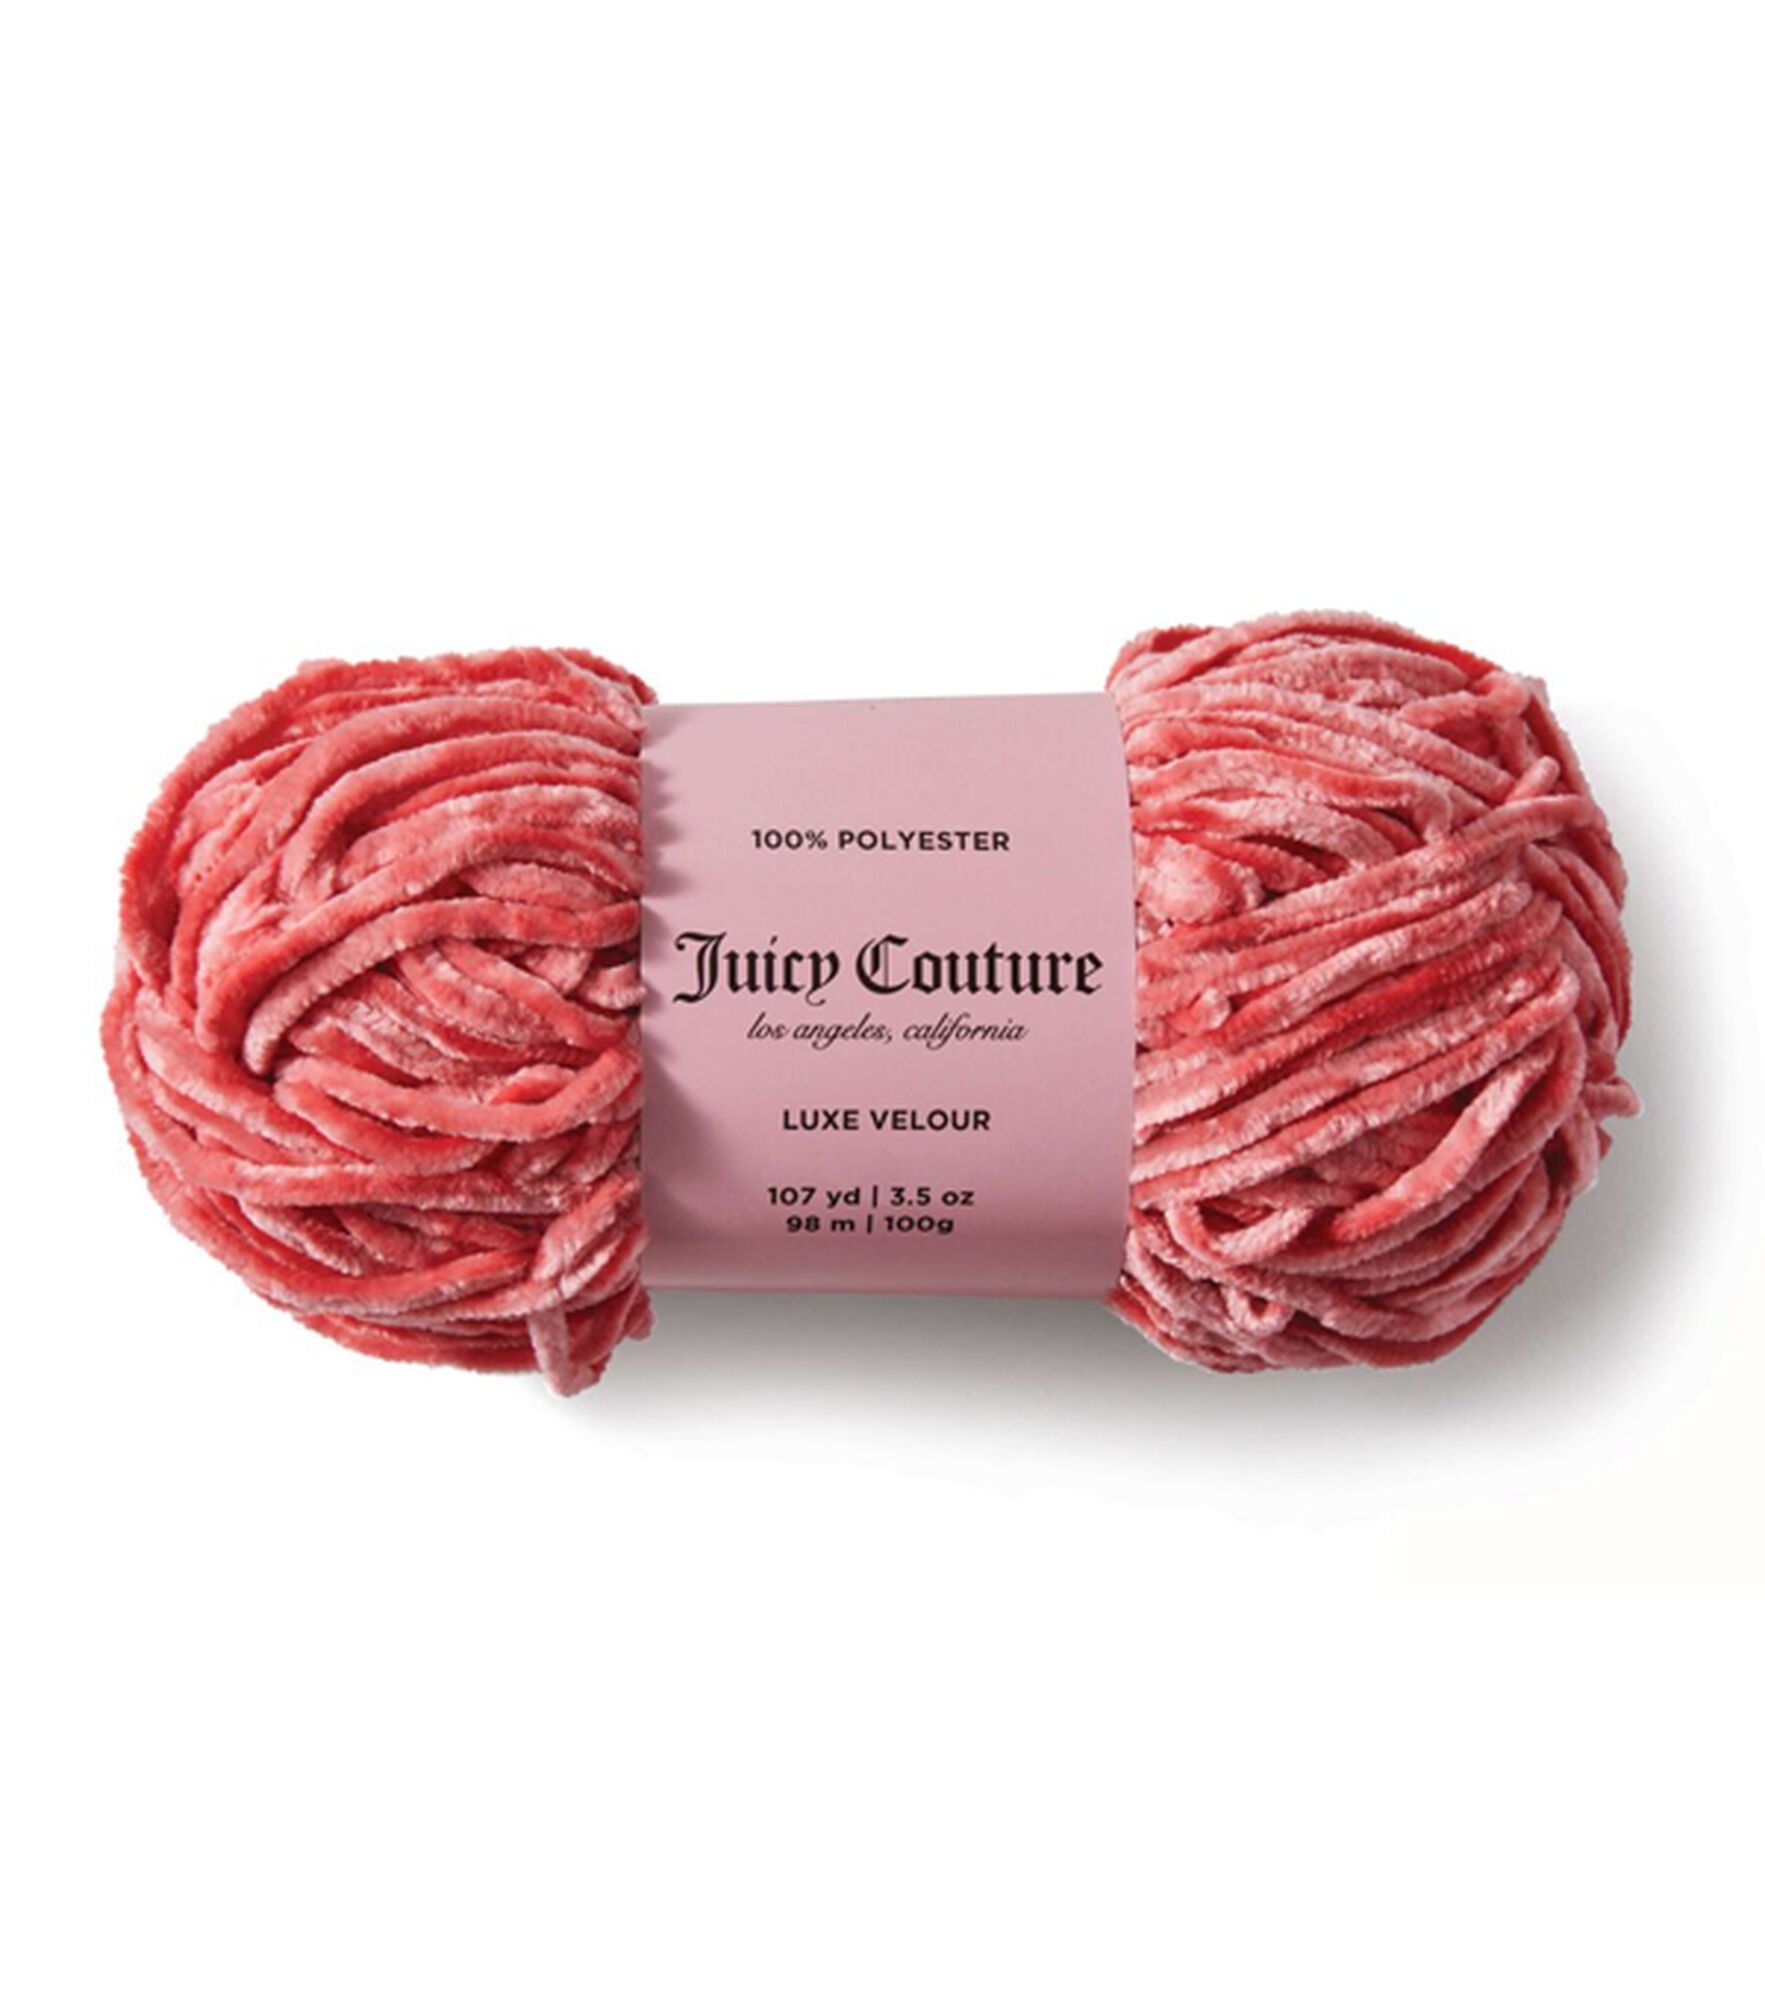 Juicy Couture 3.5oz Bulky Polyester Juicy Luxe Velour Yarn